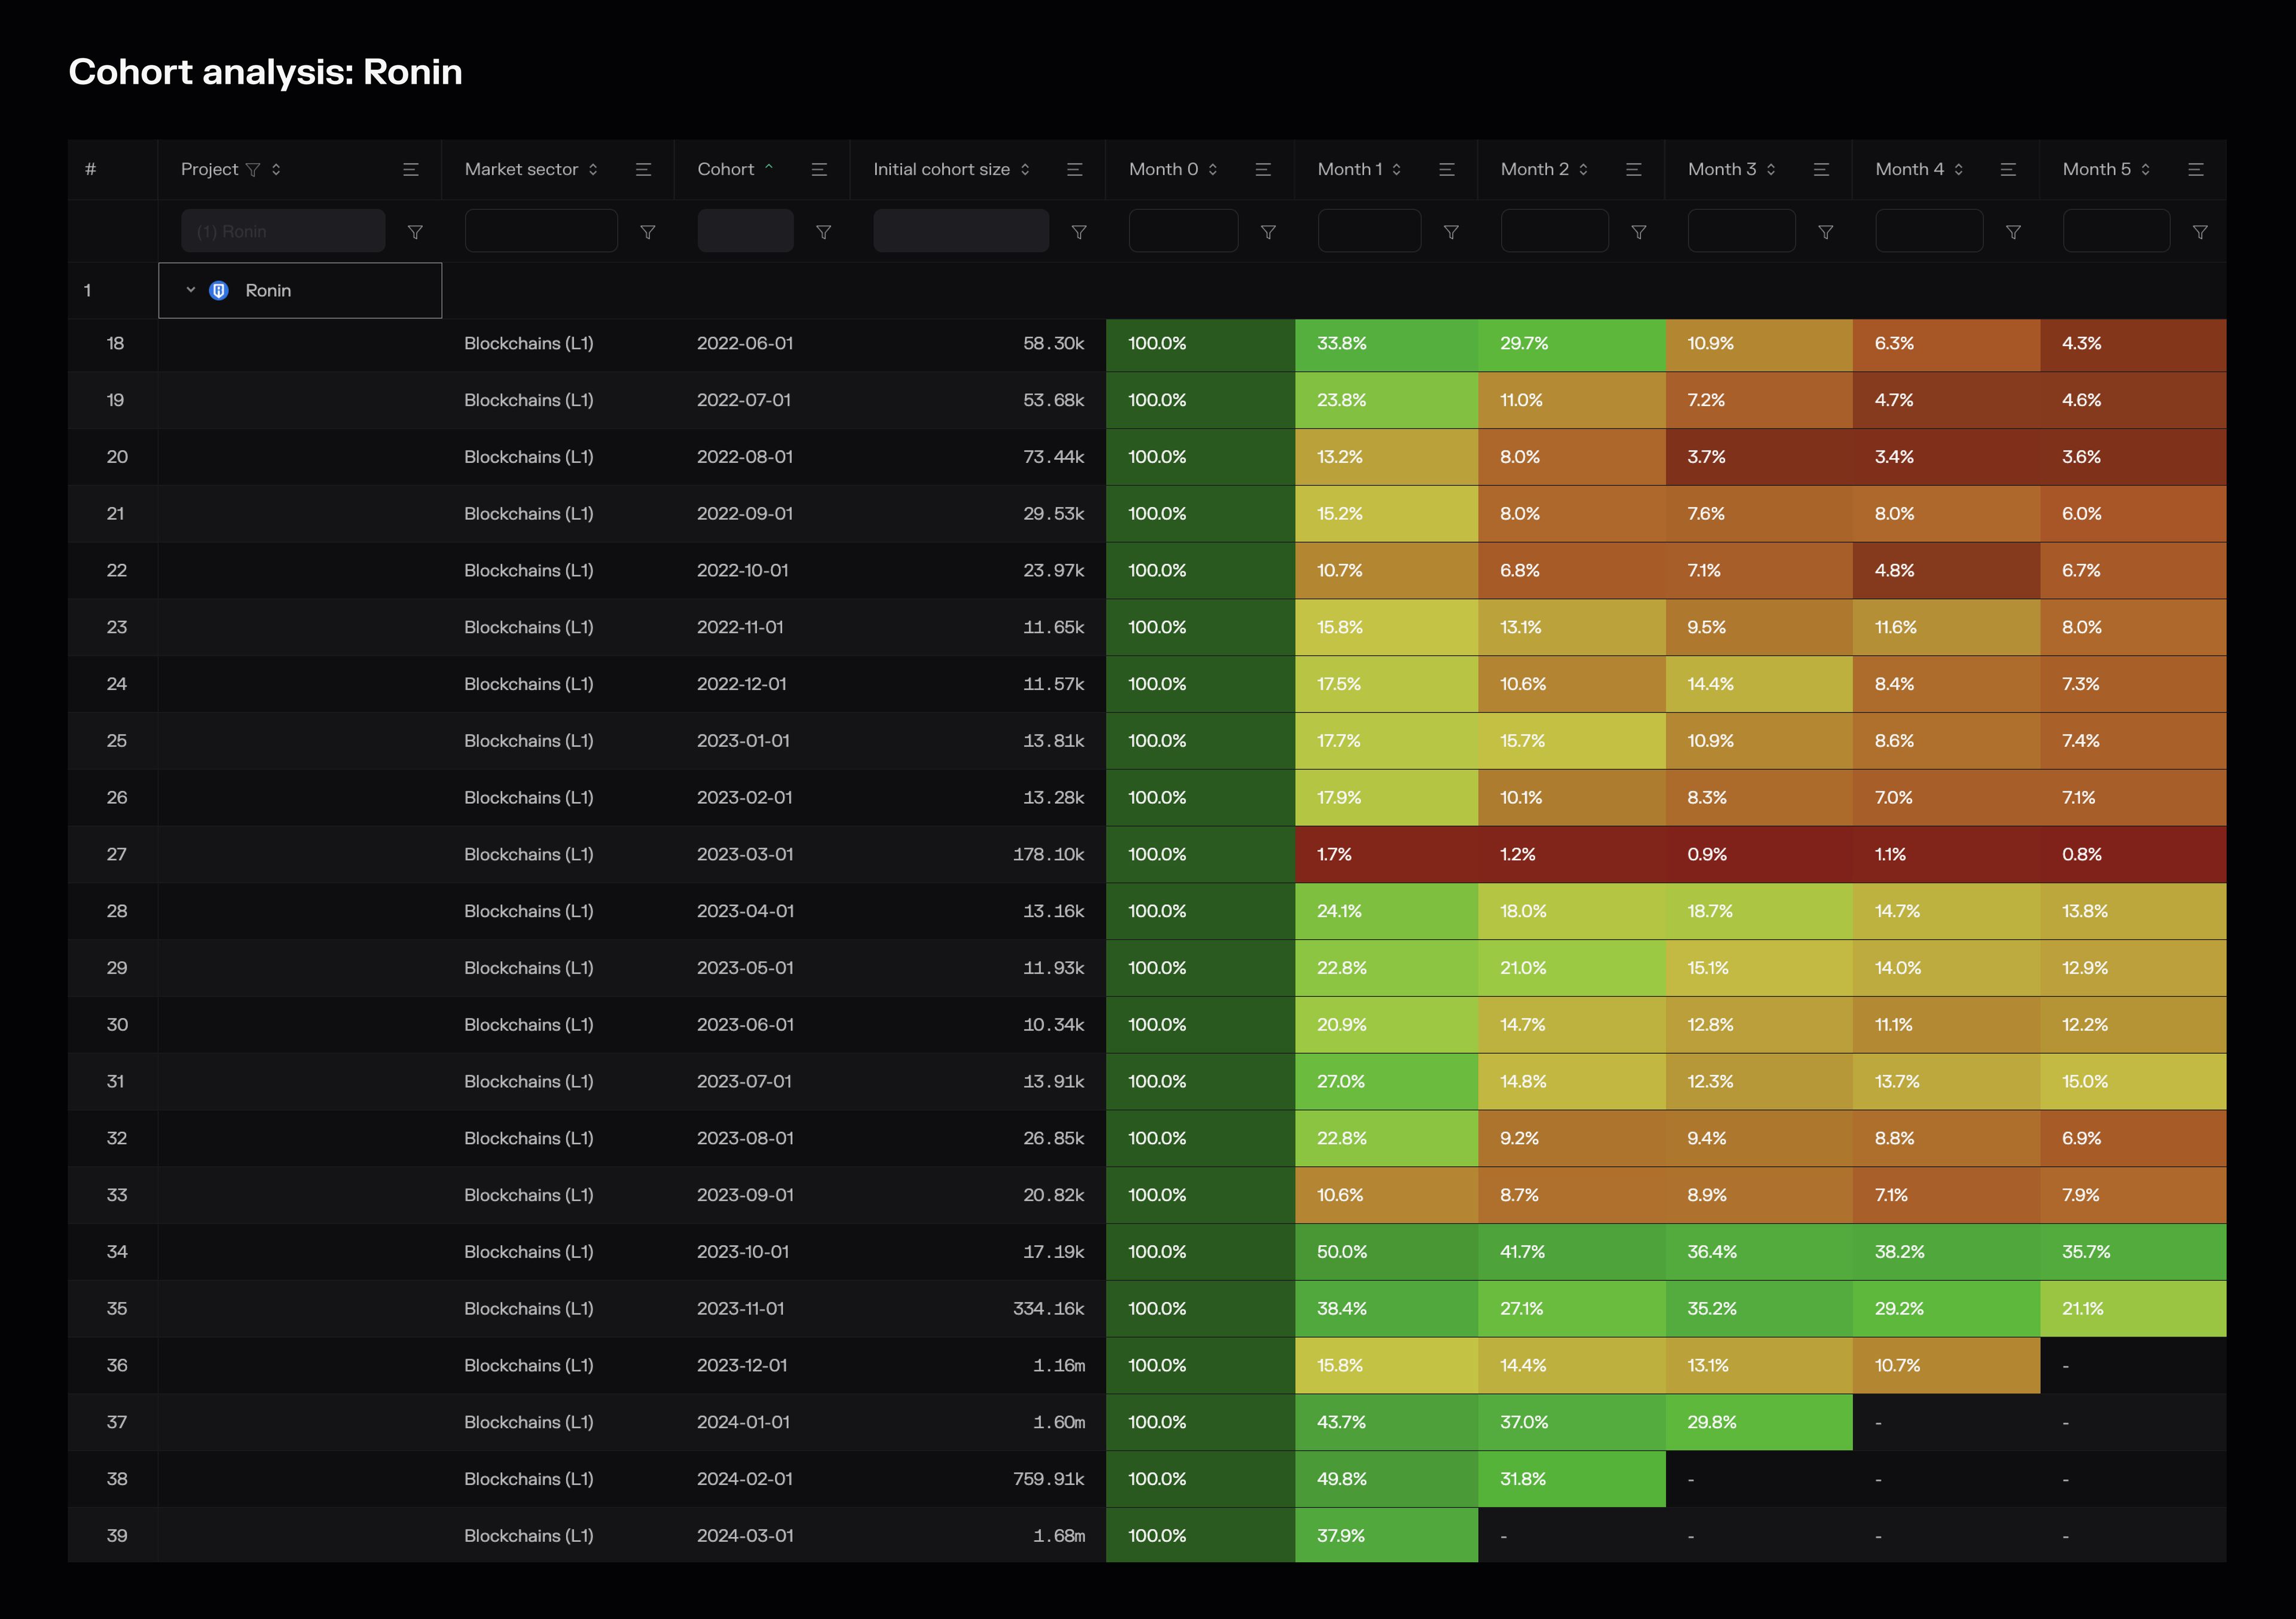 Cohort analysis (retention rates) of monthly active users on Ronin.